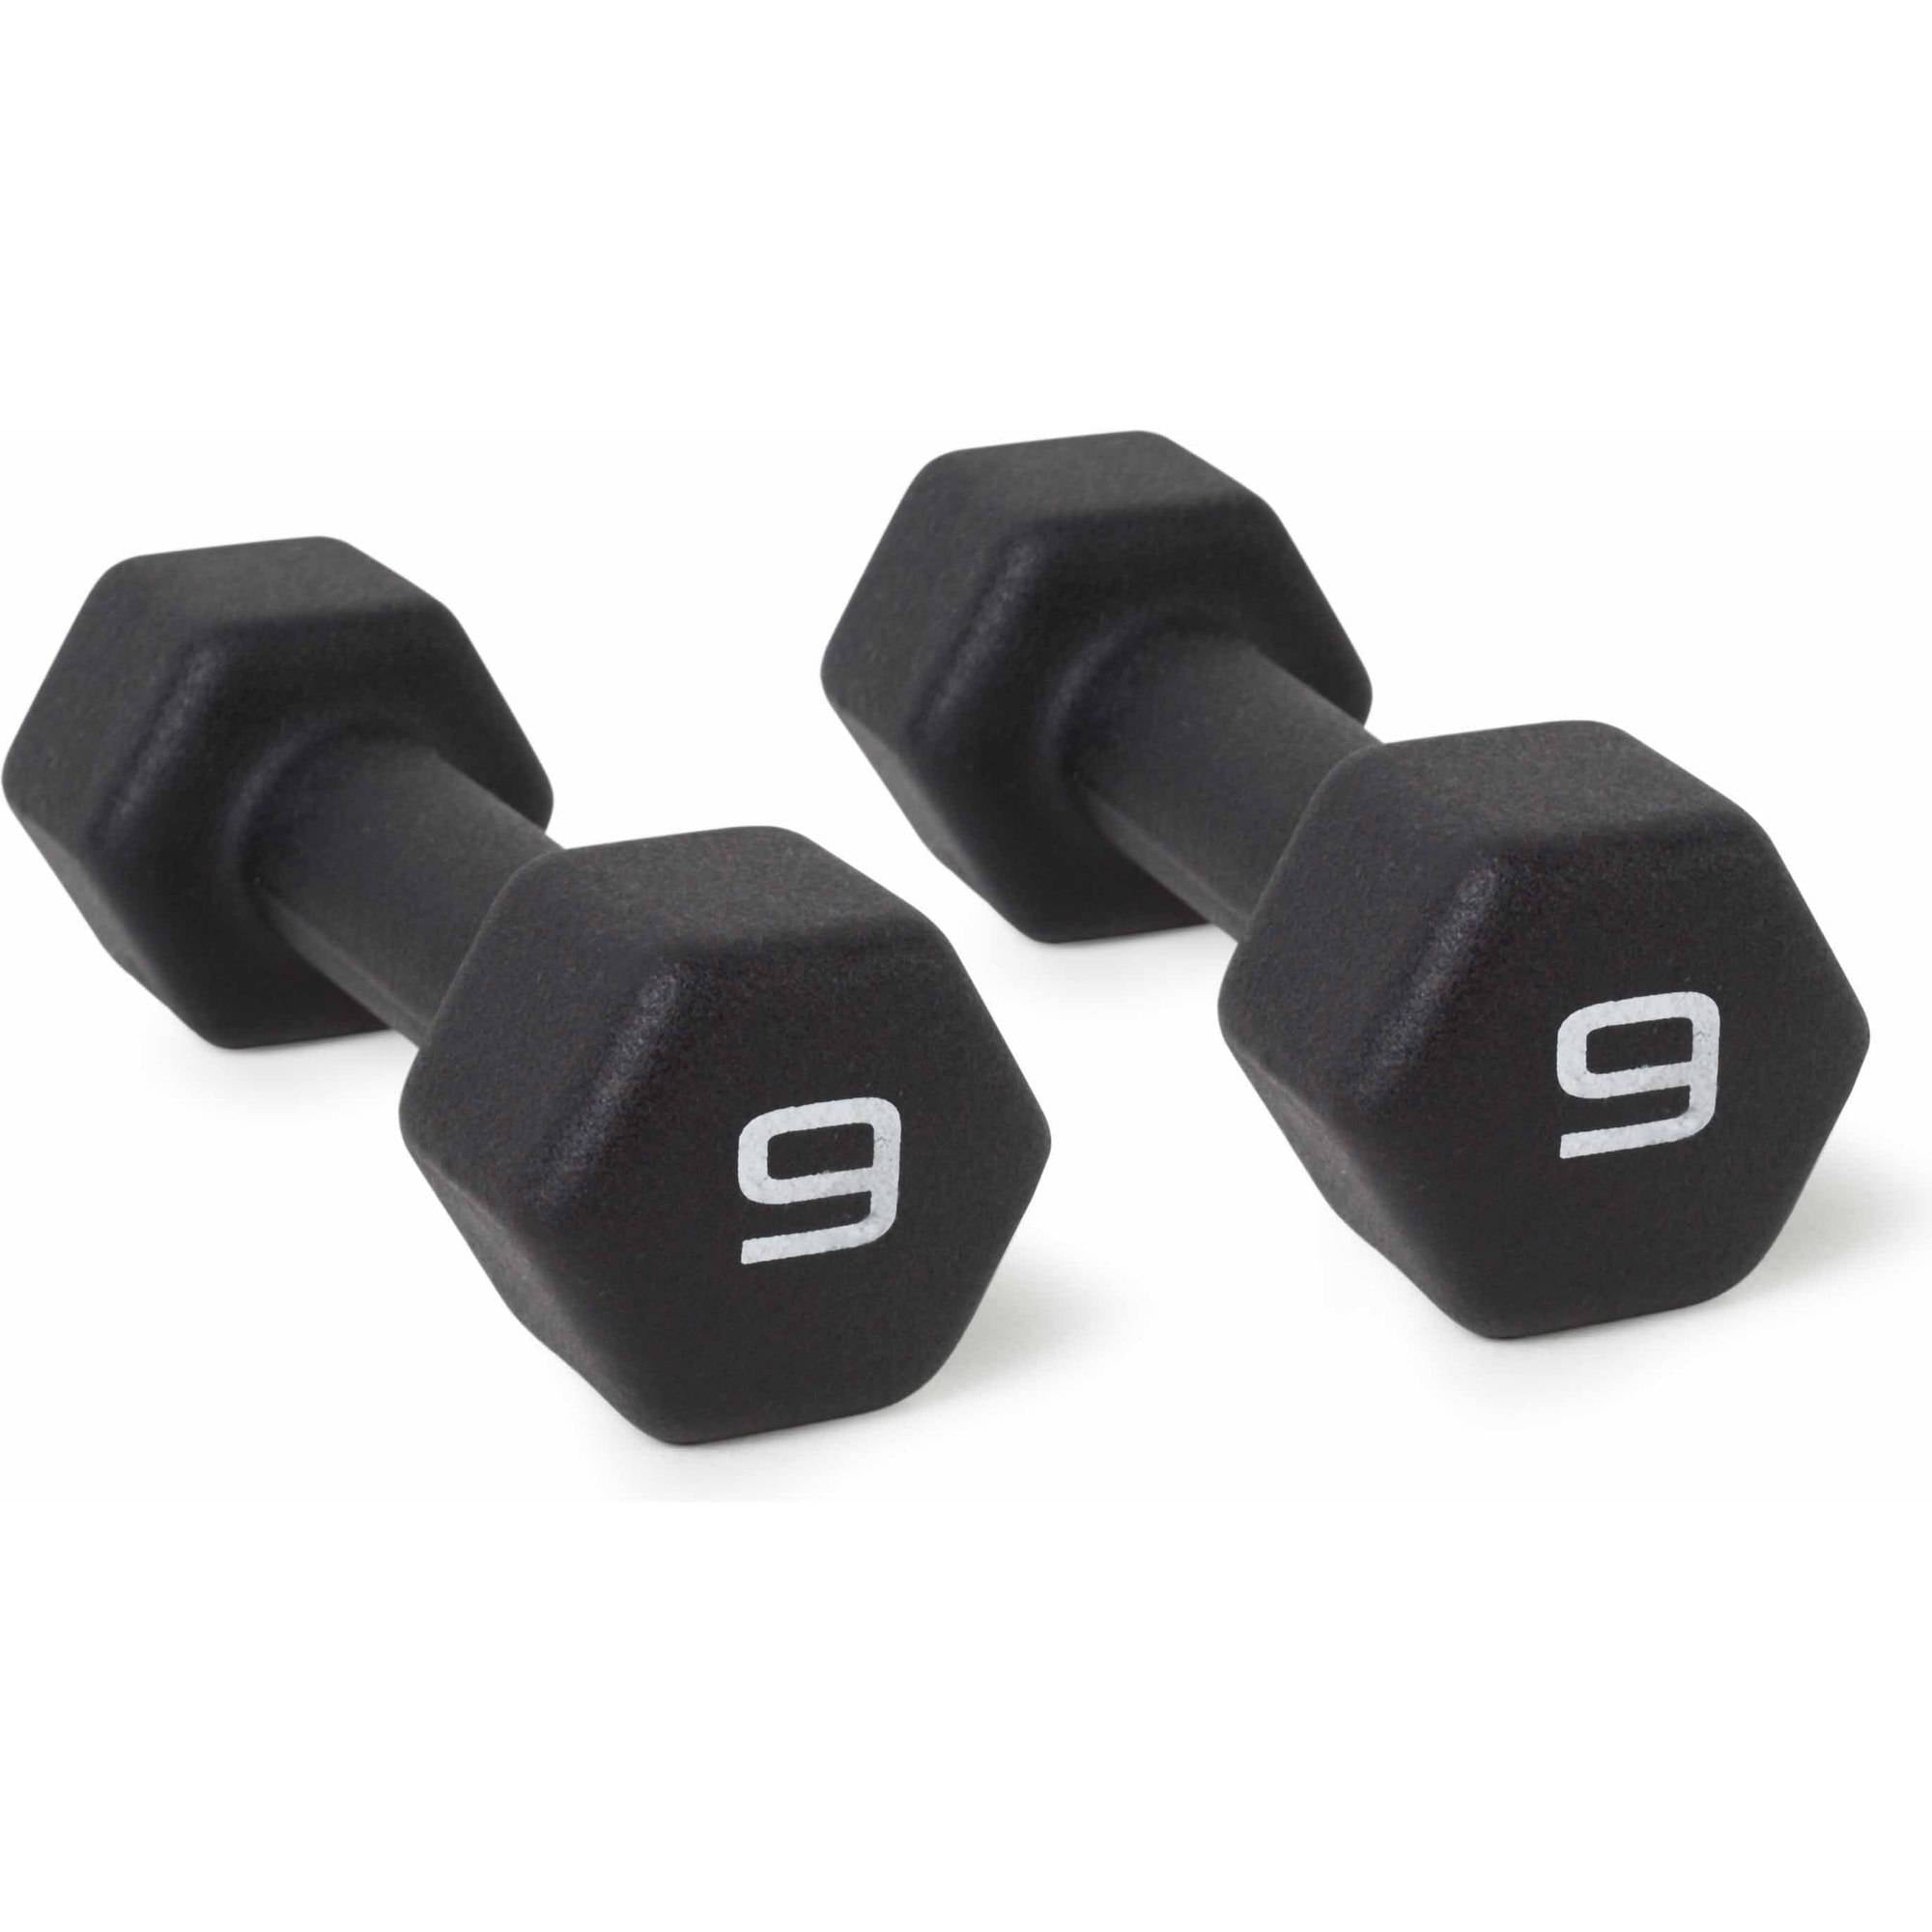 PAIR NEOPRENE DUMBBELLS Hand Weights Home Fitness Exercise 1-15 lbs SET OF 2 